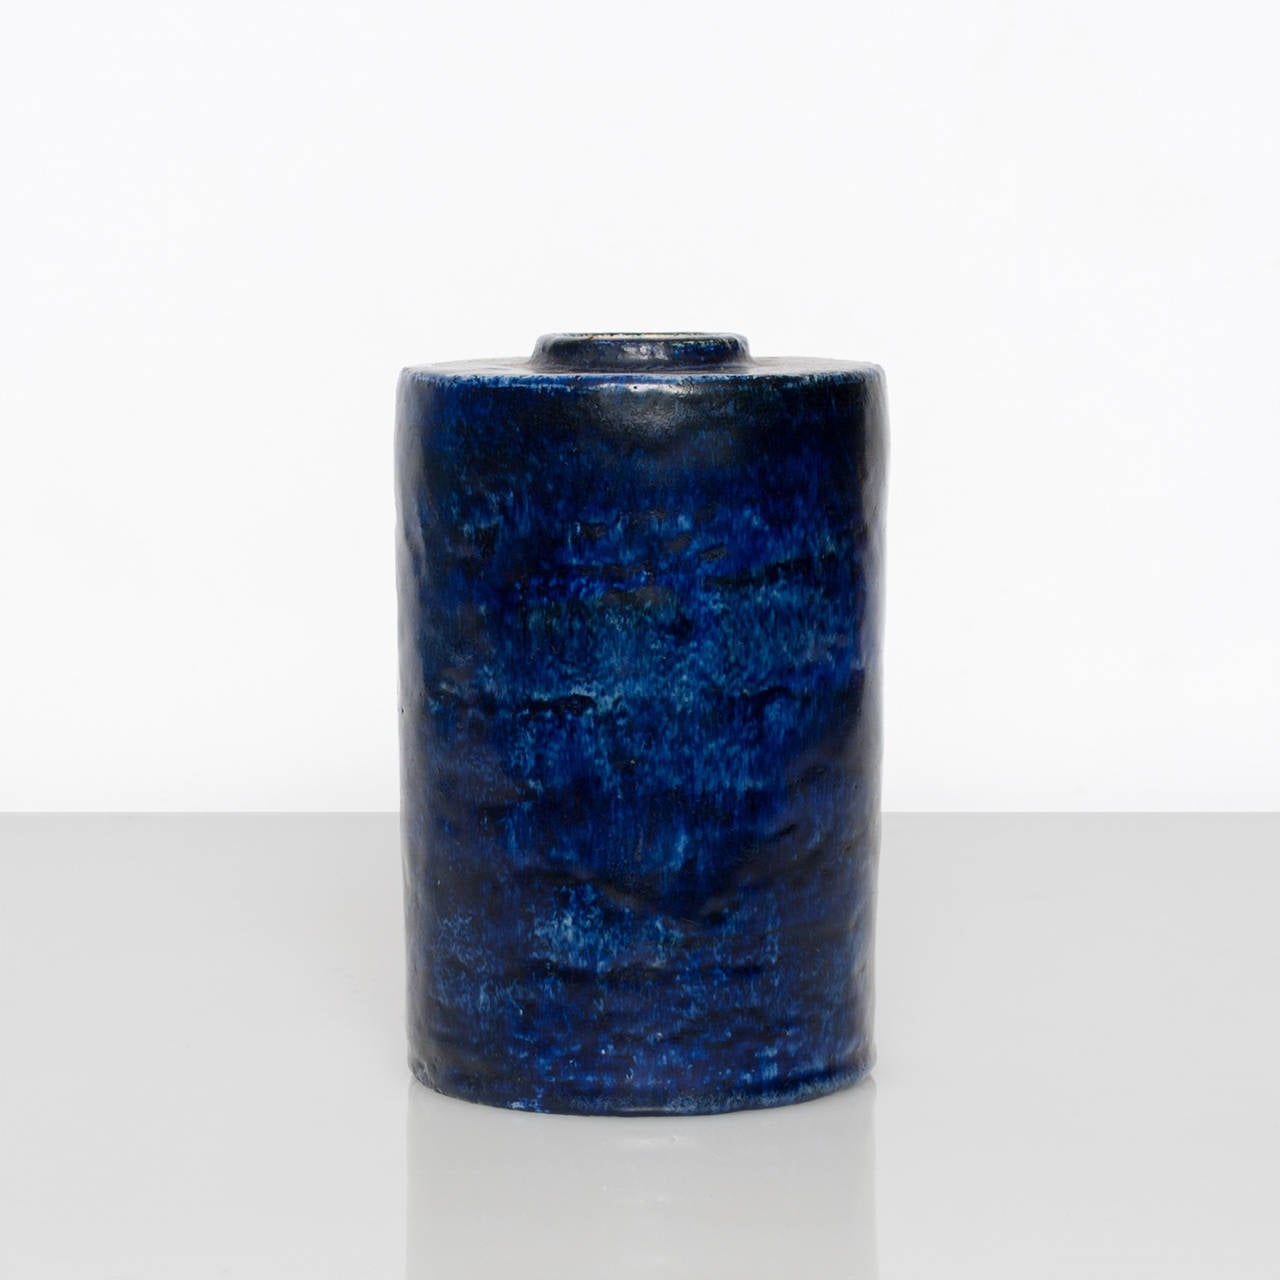 A Swedish art deco unique ceramic vases by Gertrud Lonegren for Rorstrand circa 1938-1942. Cylindrical in form with raised opening and a mottled cobalt blue glaze. H: 7.5